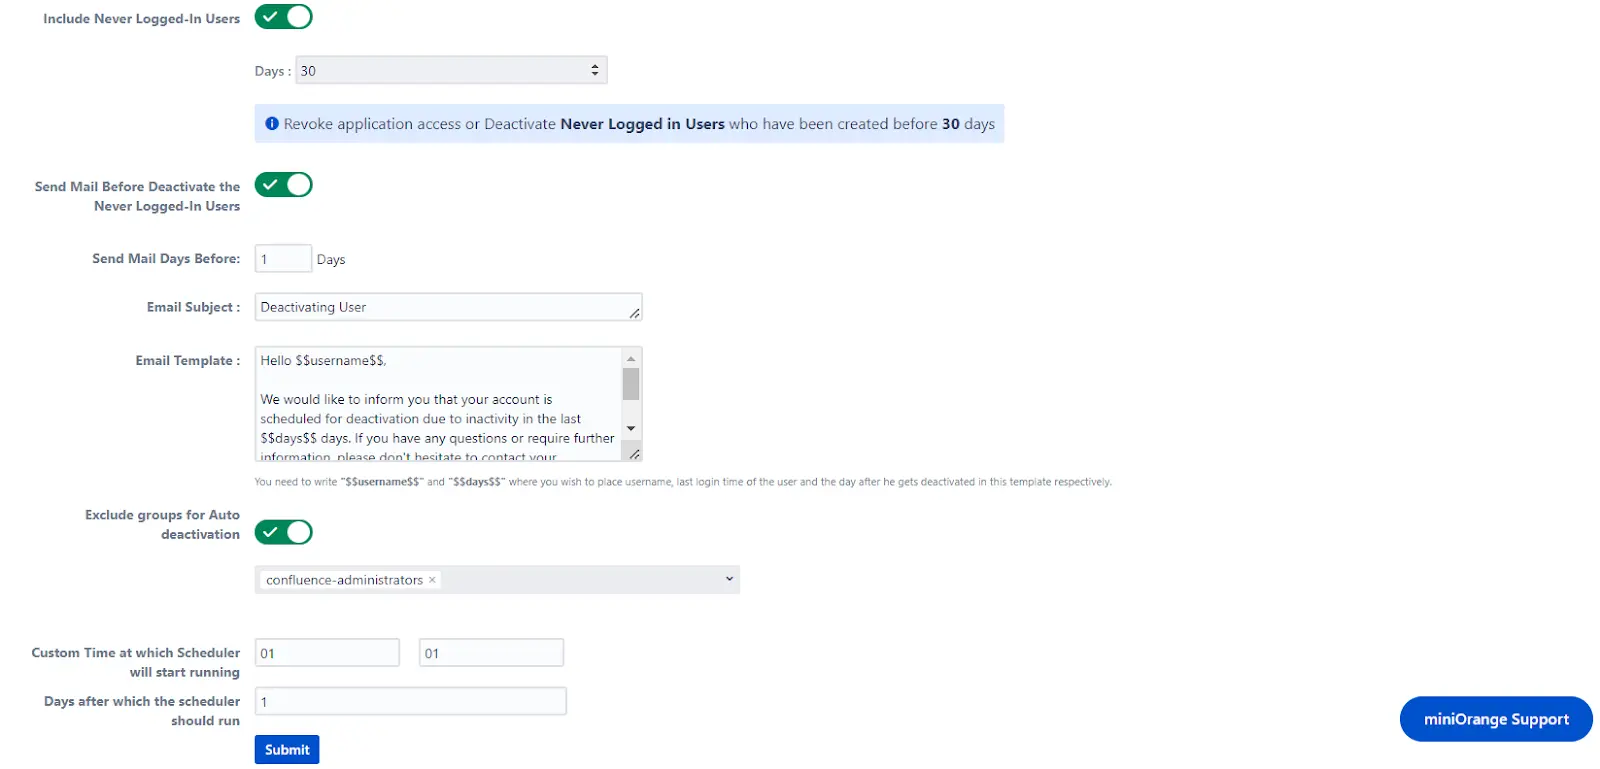 Setup Bulk User Management fo Confluence, Bulk action management to inactivate deactivate users